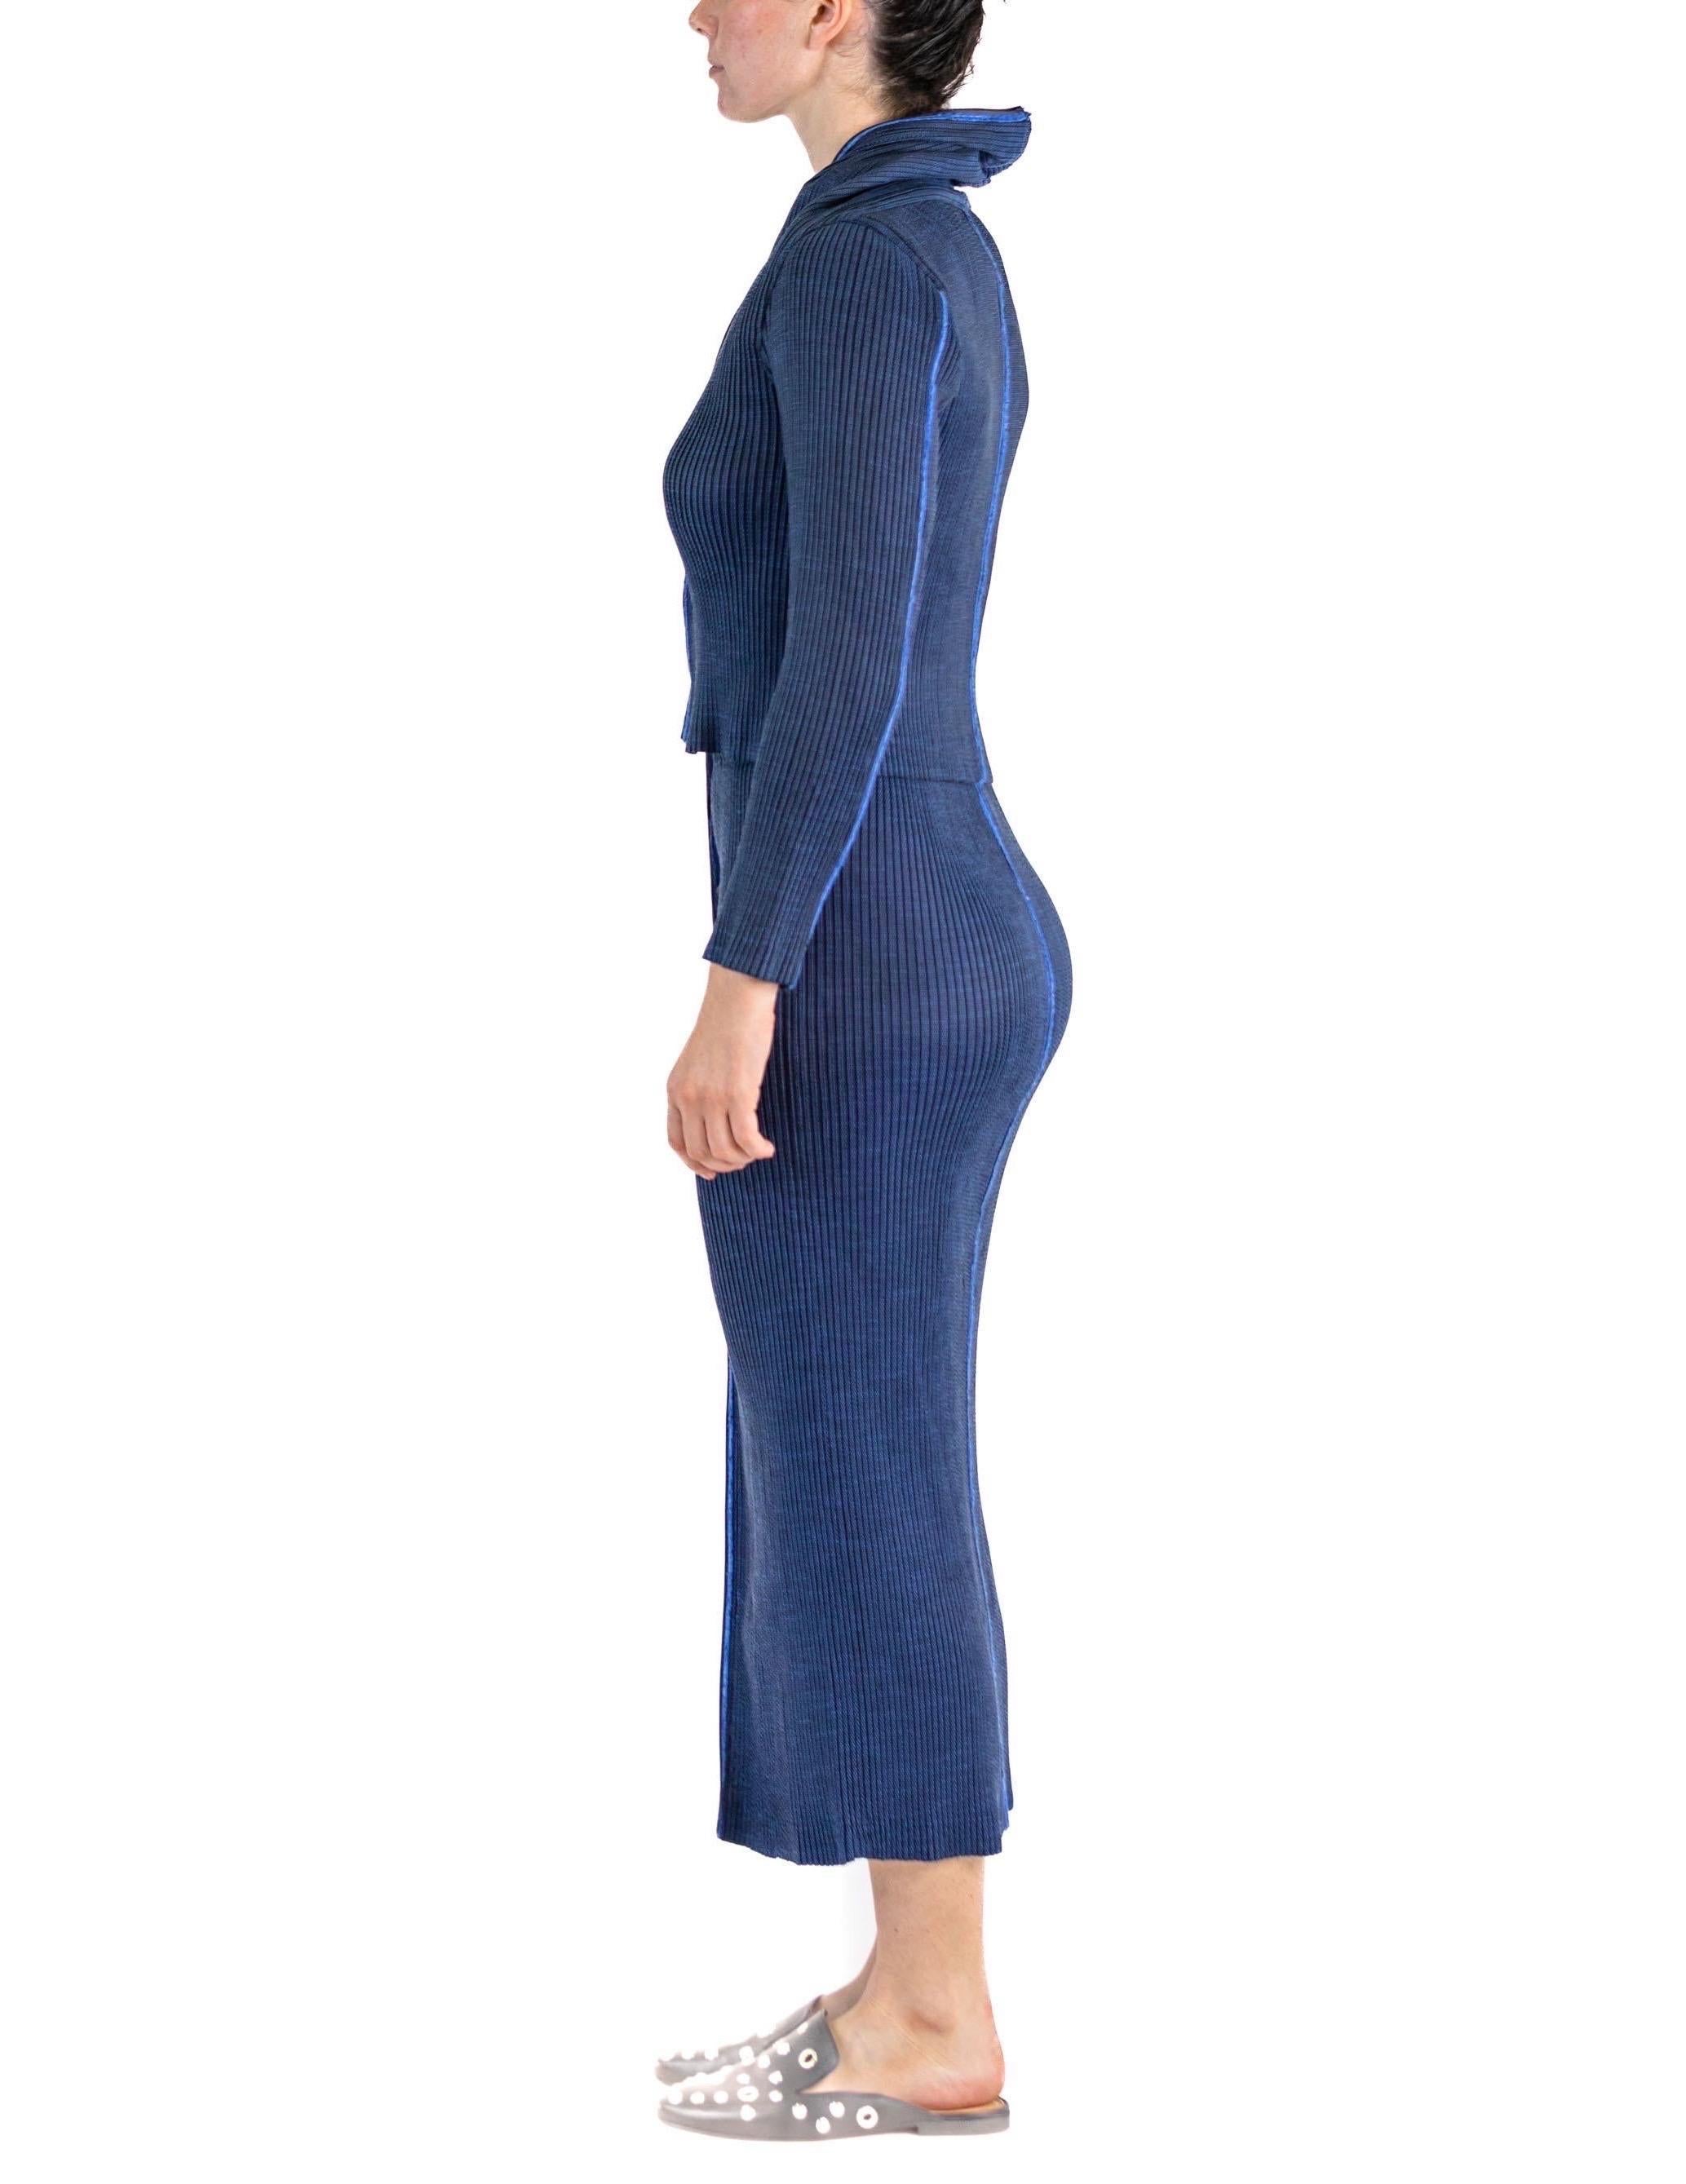 1990S ISSEY MIYAKE Blue & Black Polyester Pleated Woven Knit Skirt Suit With Bu In Excellent Condition For Sale In New York, NY